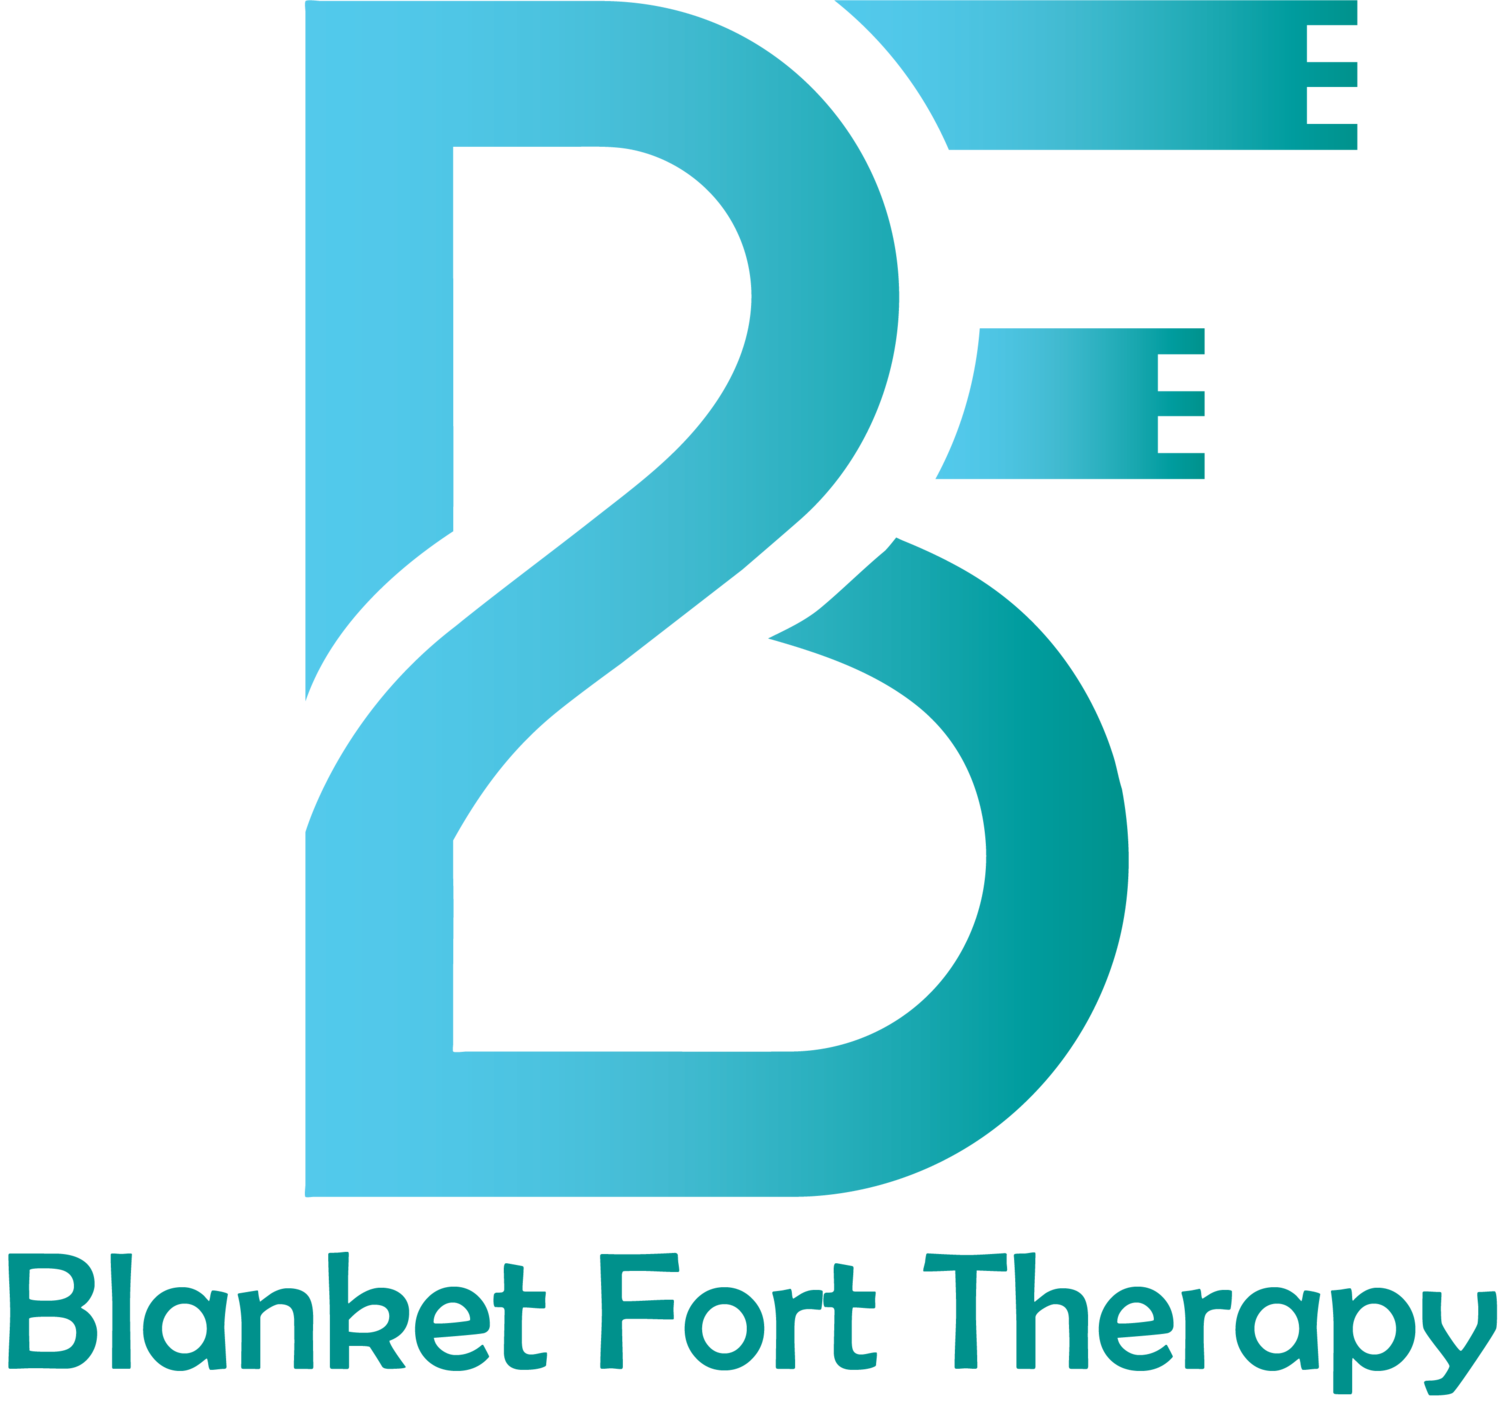 Blanket Fort Therapy